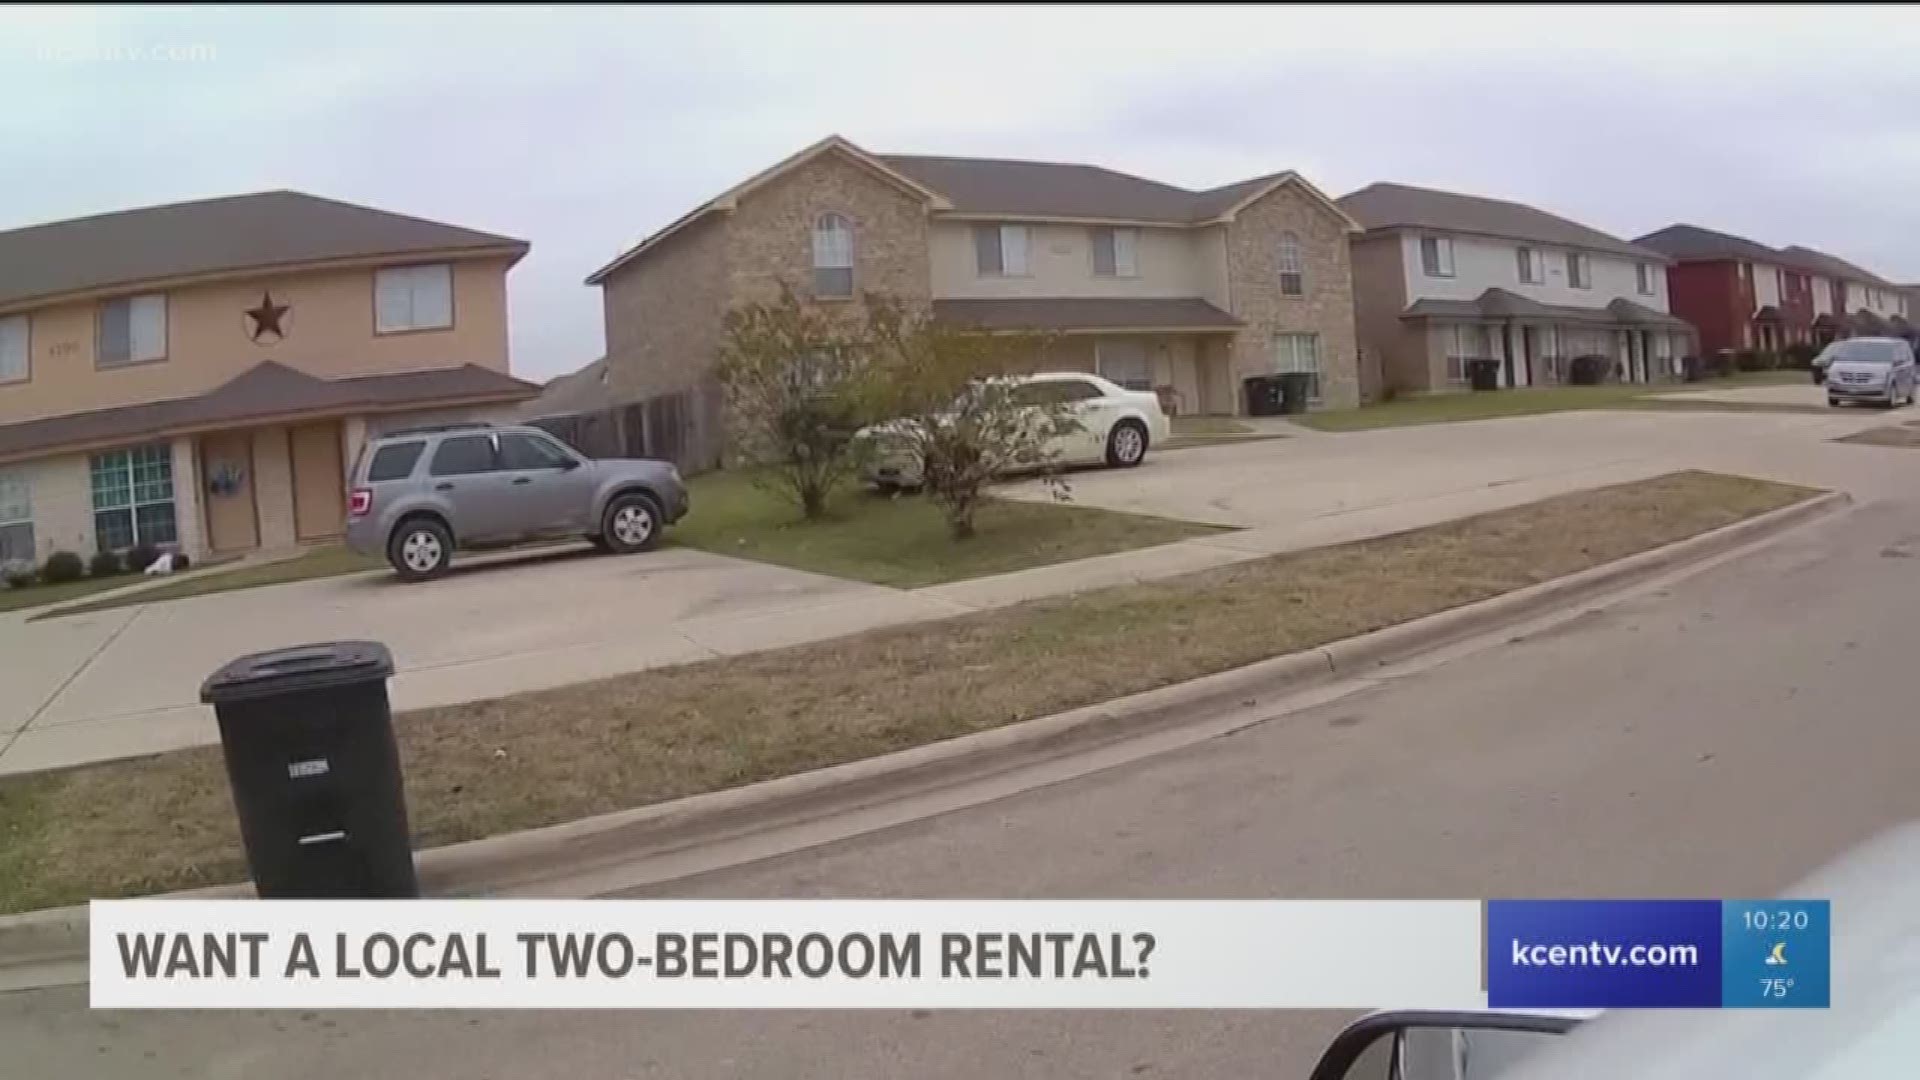 If you're looking got rent a two-bedroom apartment in central Texas, a new report shows just how much you'd need to earn. 